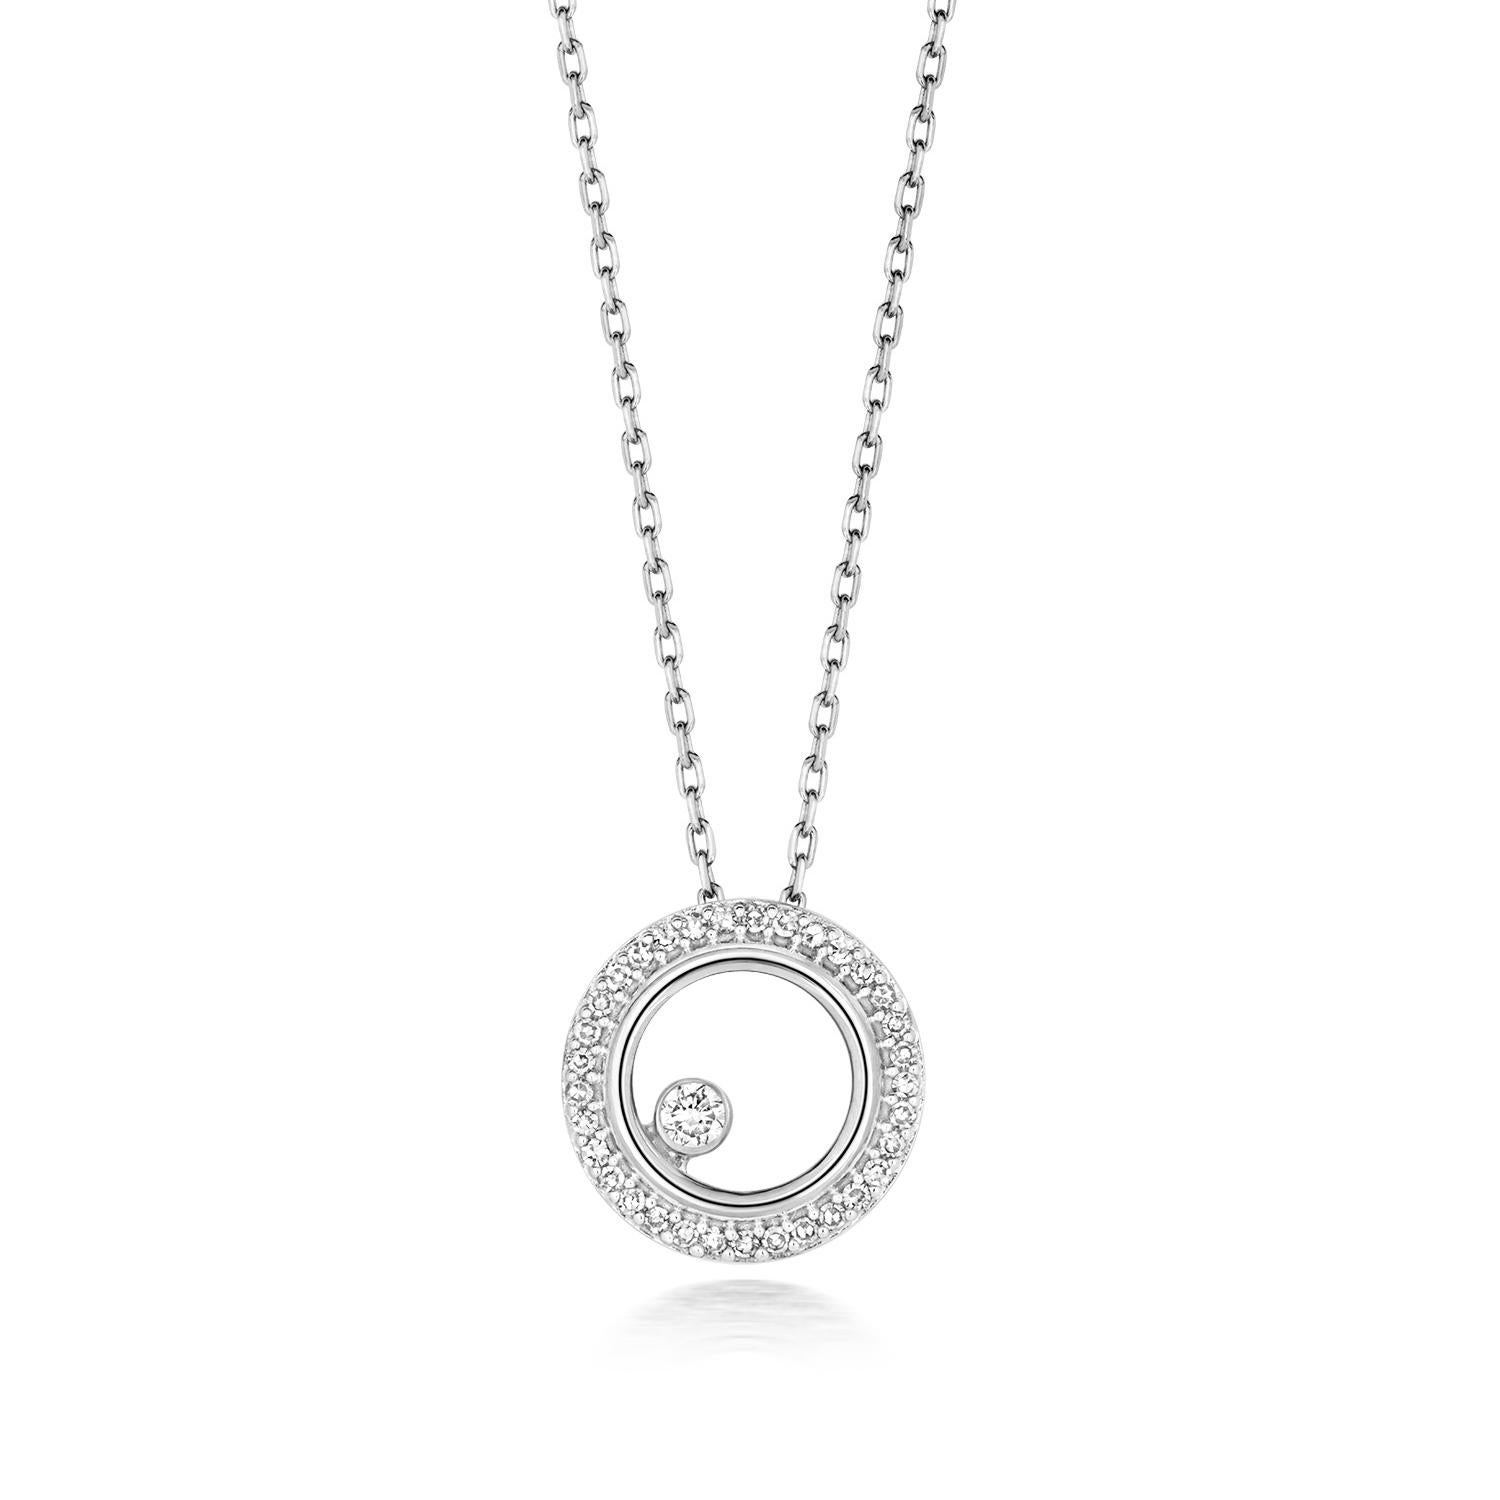 DIAMOND NECKLACE CIRCLE

9CT W/G H SC I1 0.08CT

Weight: 1.5g

Number Of Stones:34

Total Carates:0.080